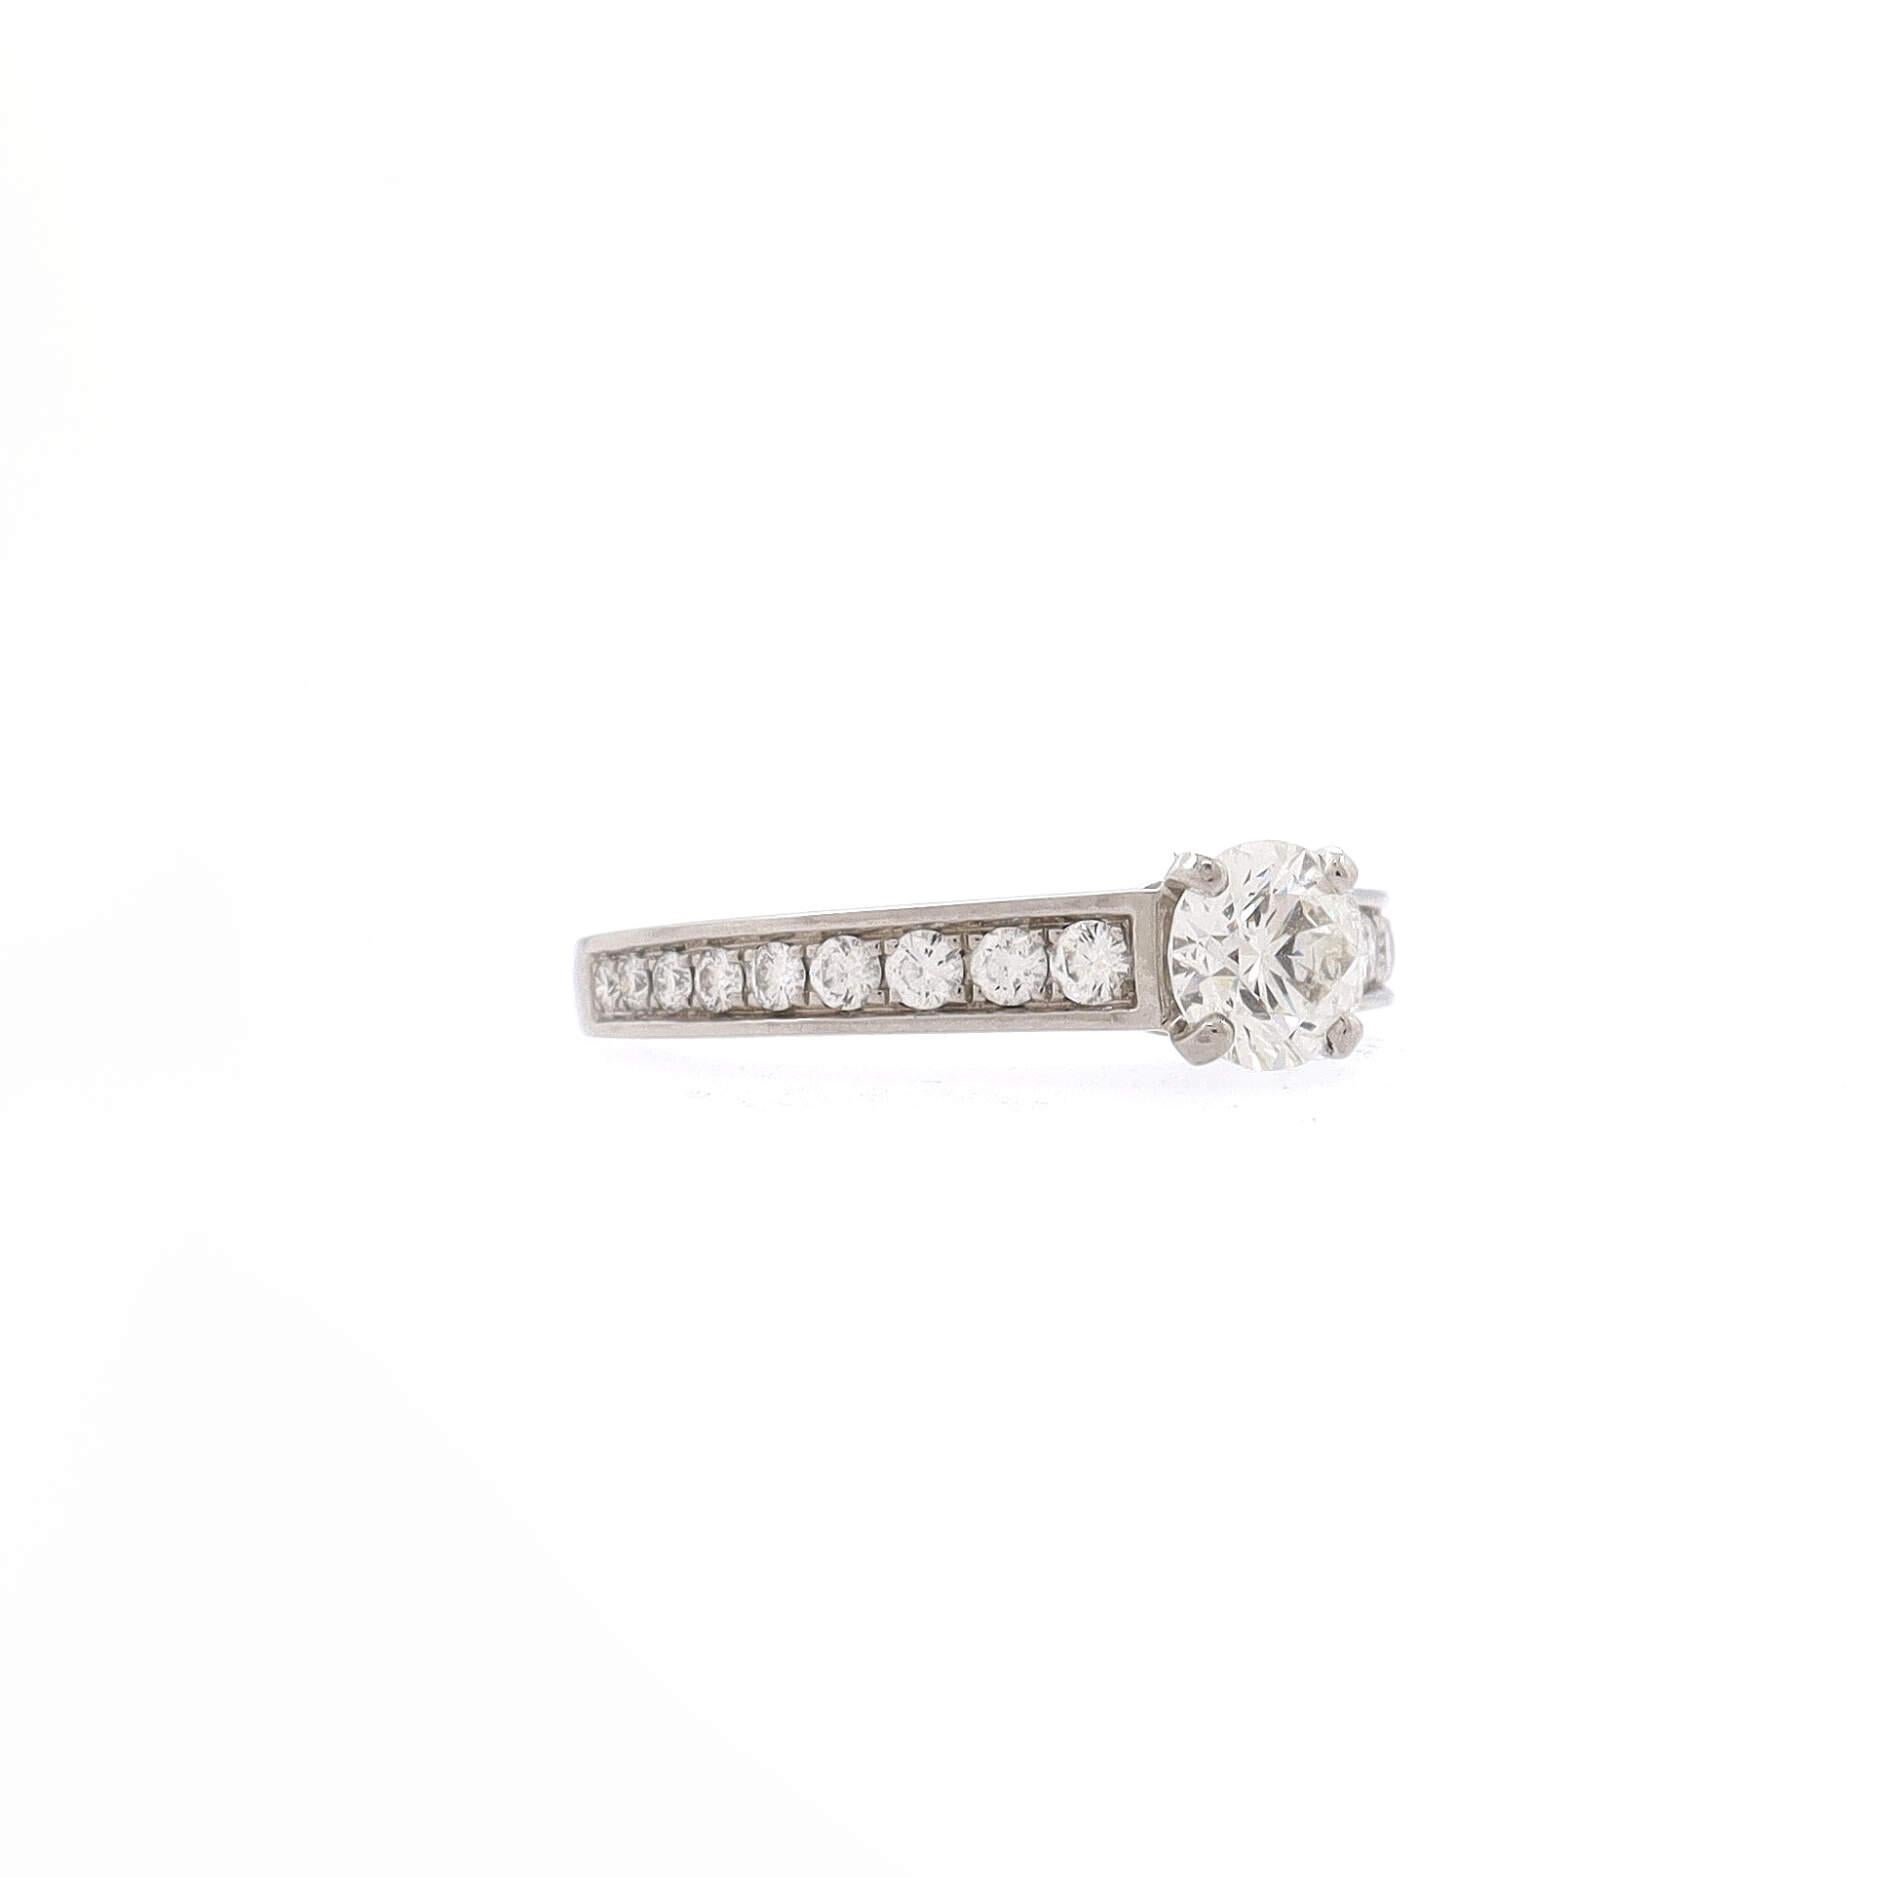 Condition: Good. Moderately heavy wear with slightly obscured hallmarks.
Accessories: No Accessories
Measurements: Size: 4.5 - 48, Width: 2.10 mm
Designer: Cartier
Model: Solitaire 1895 Ring Platinum with RBC Diamond H/VS1 and Pave Diamonds